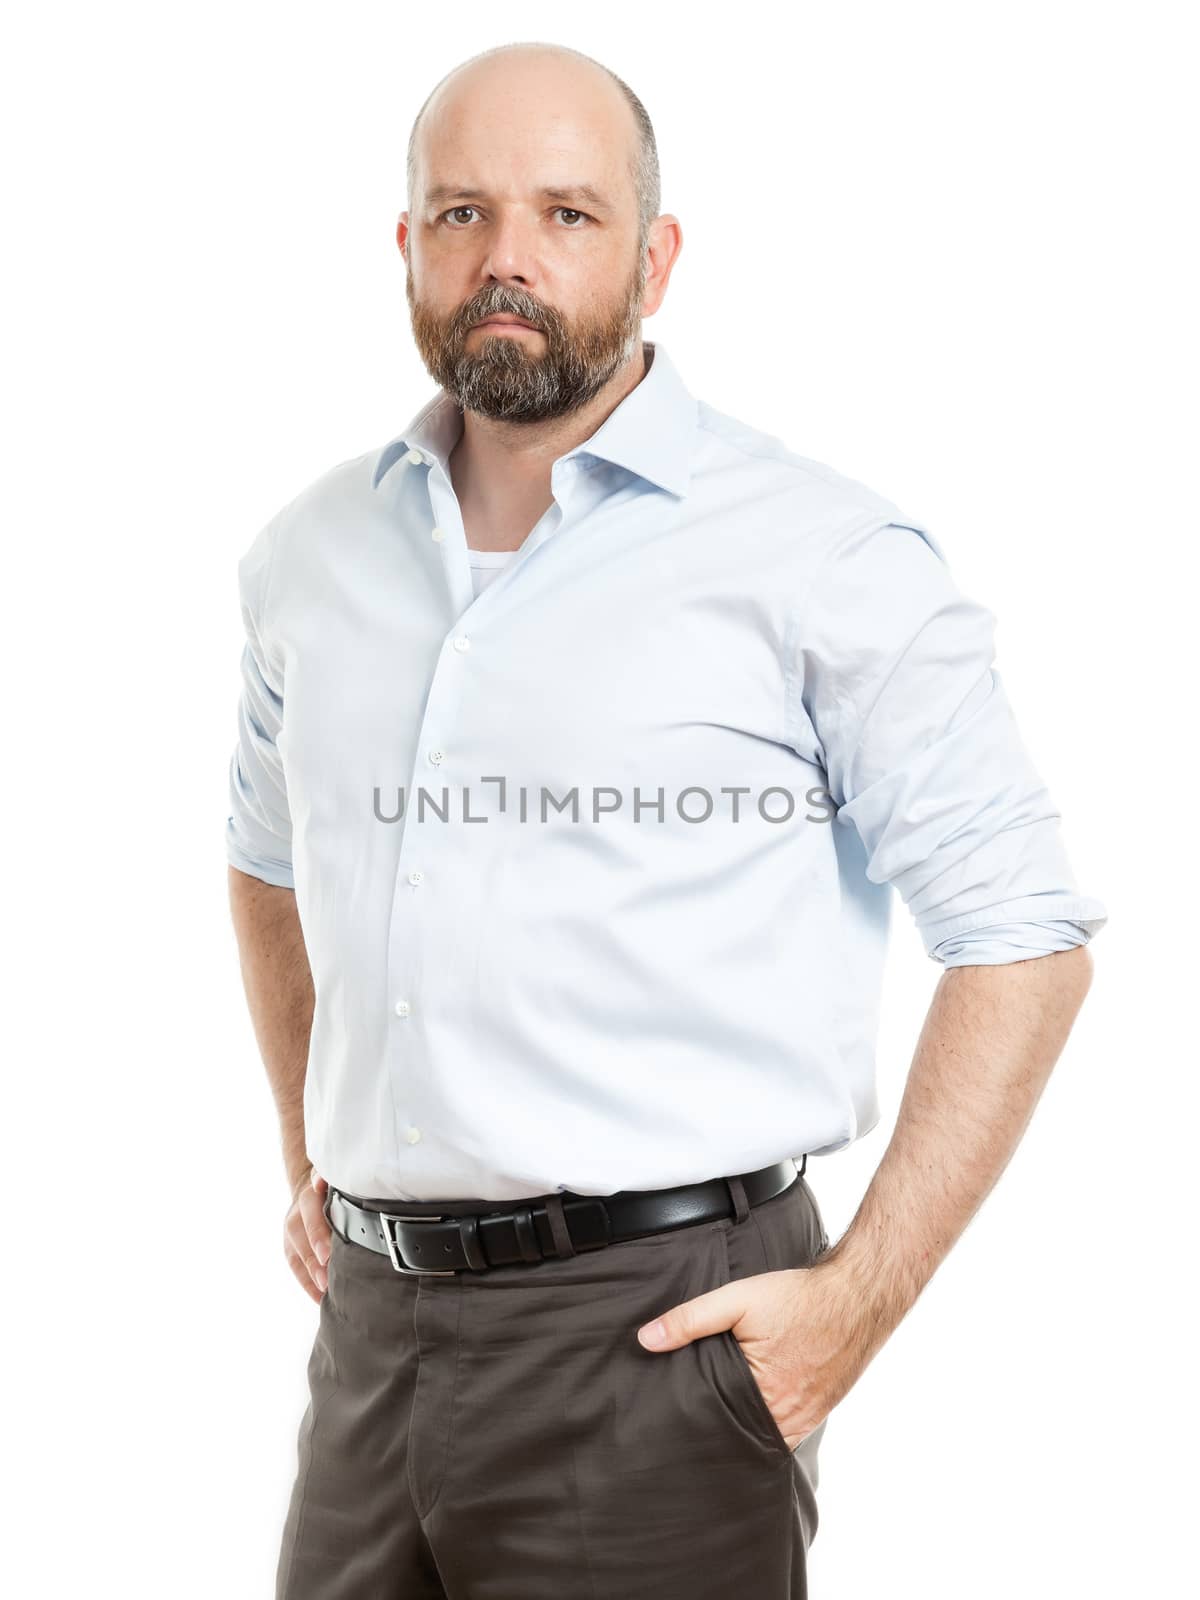 An image of a handsome business man